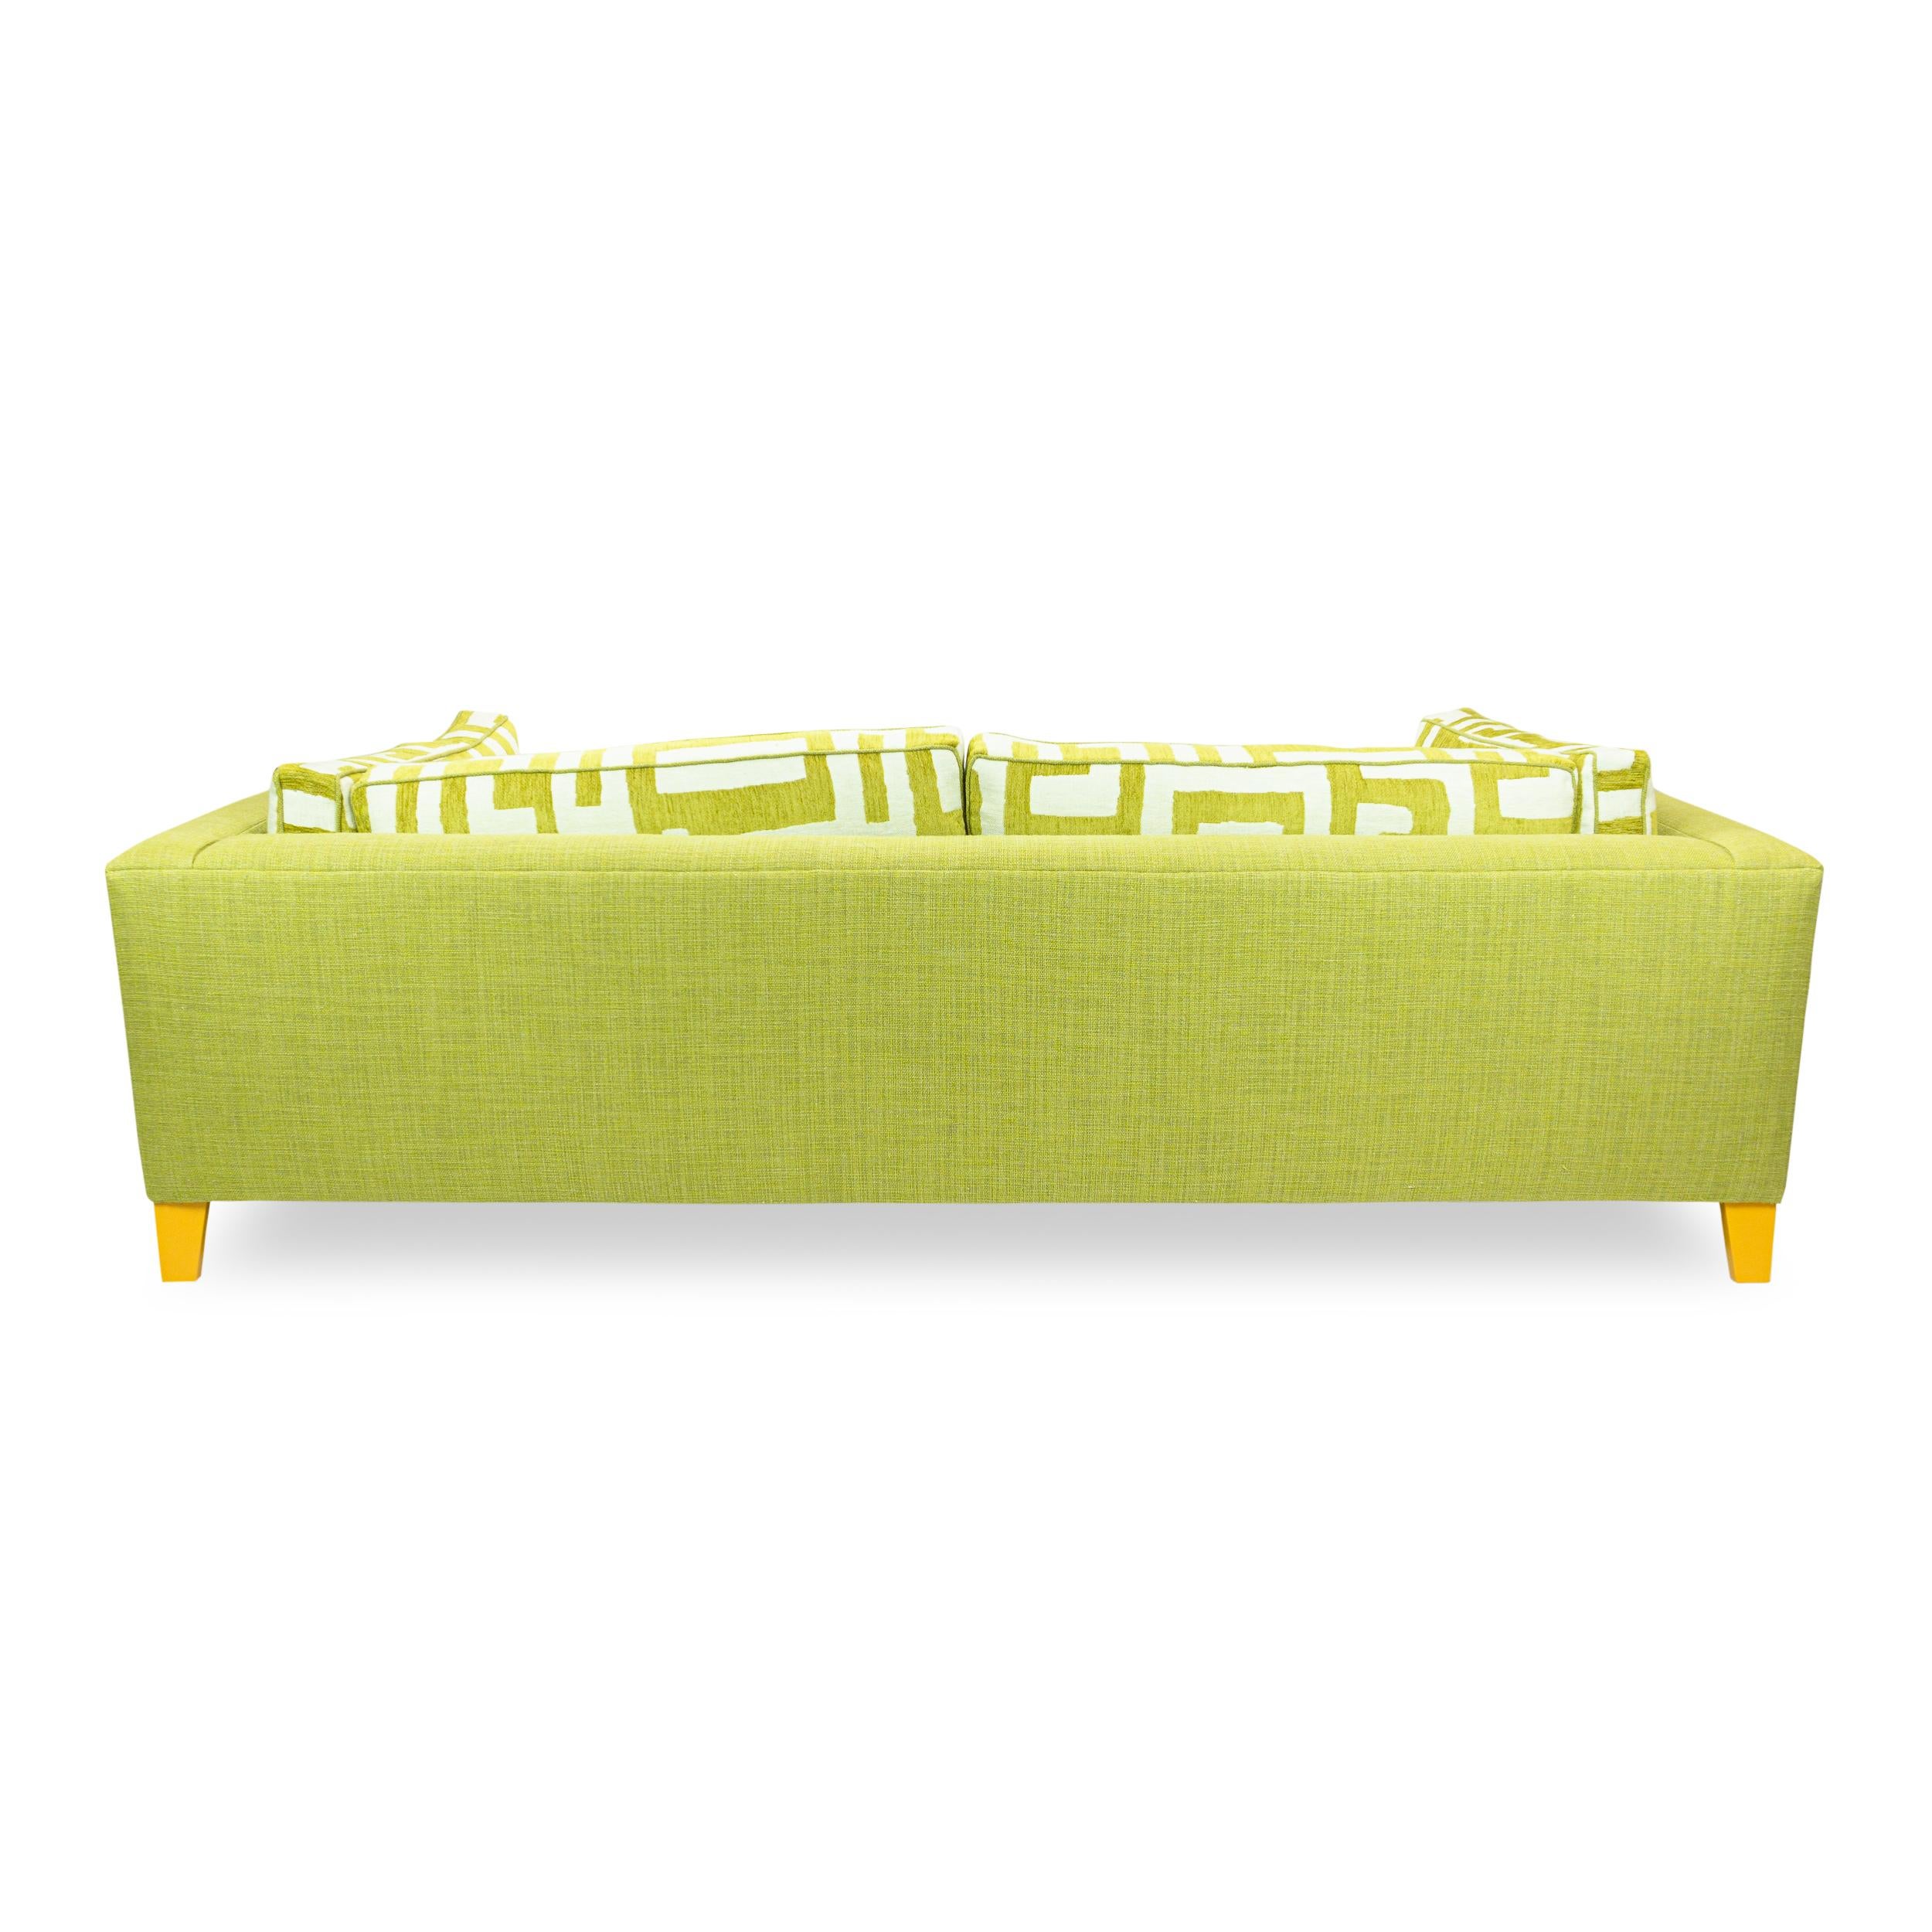 Maple Lime Green Bench Cushion Sofa with Maze Pattern Cushions and Sunflower Feet For Sale